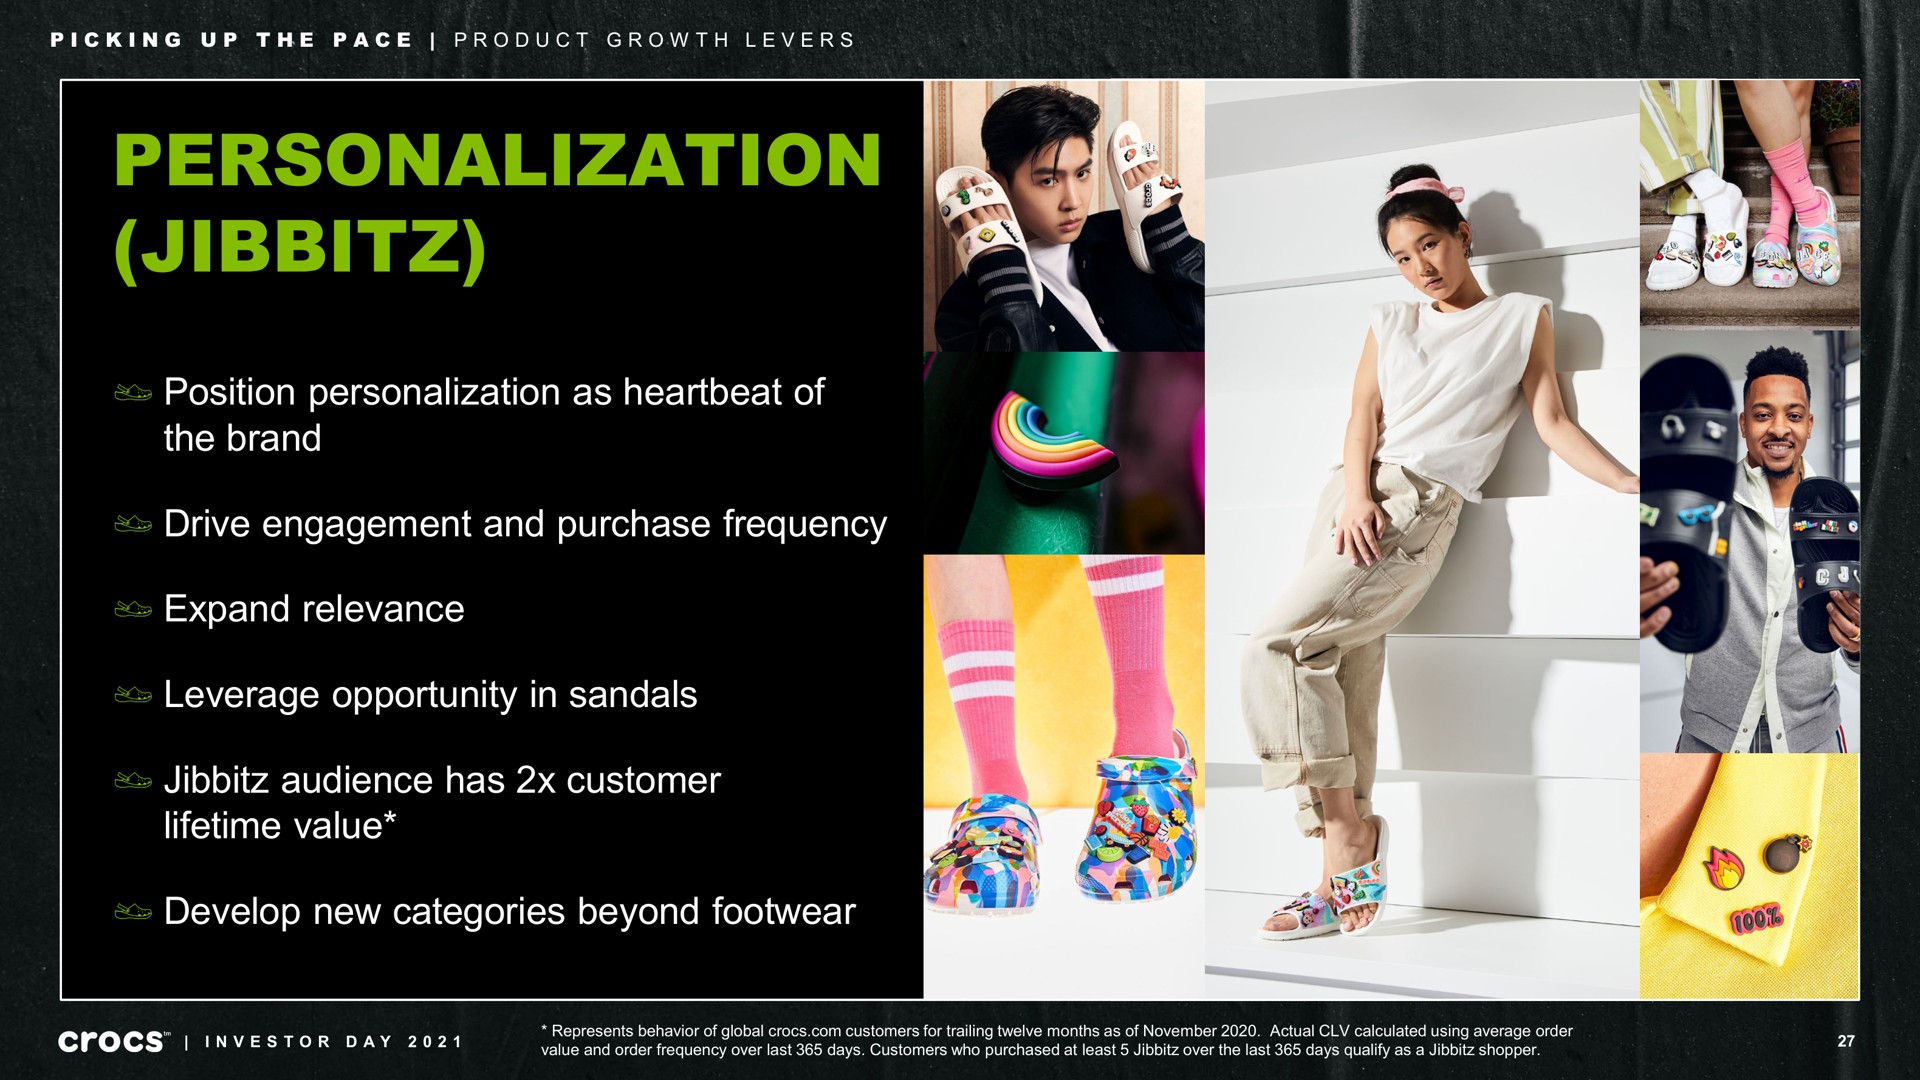 personalization position personalization as heartbeat of the brand drive engagement and purchase frequency expand relevance leverage opportunity in sandals audience has customer lifetime value develop new categories beyond footwear picking up pace product growth levers | Crocs